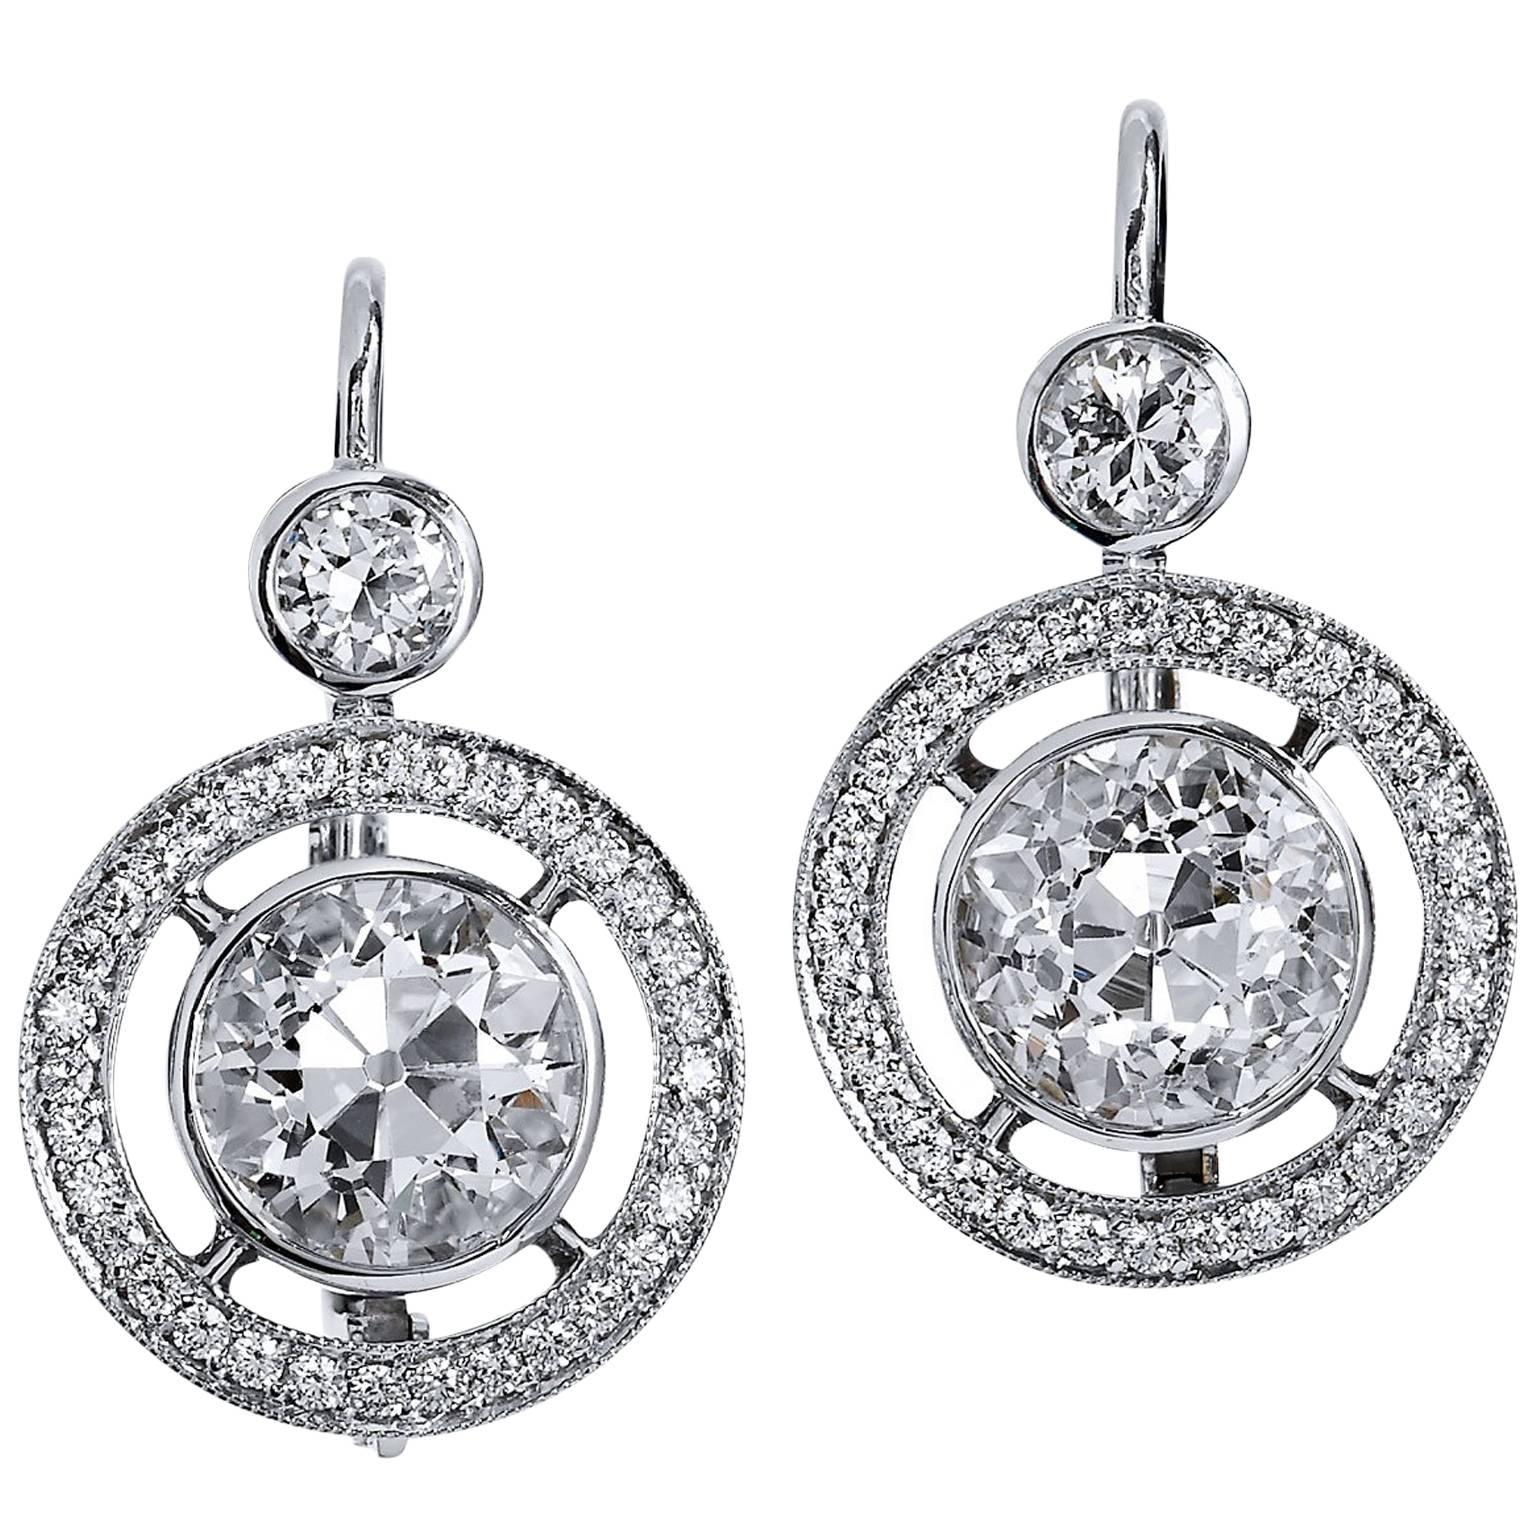 H and H 3.56 Carat Old European Cut Diamond white gold Earring